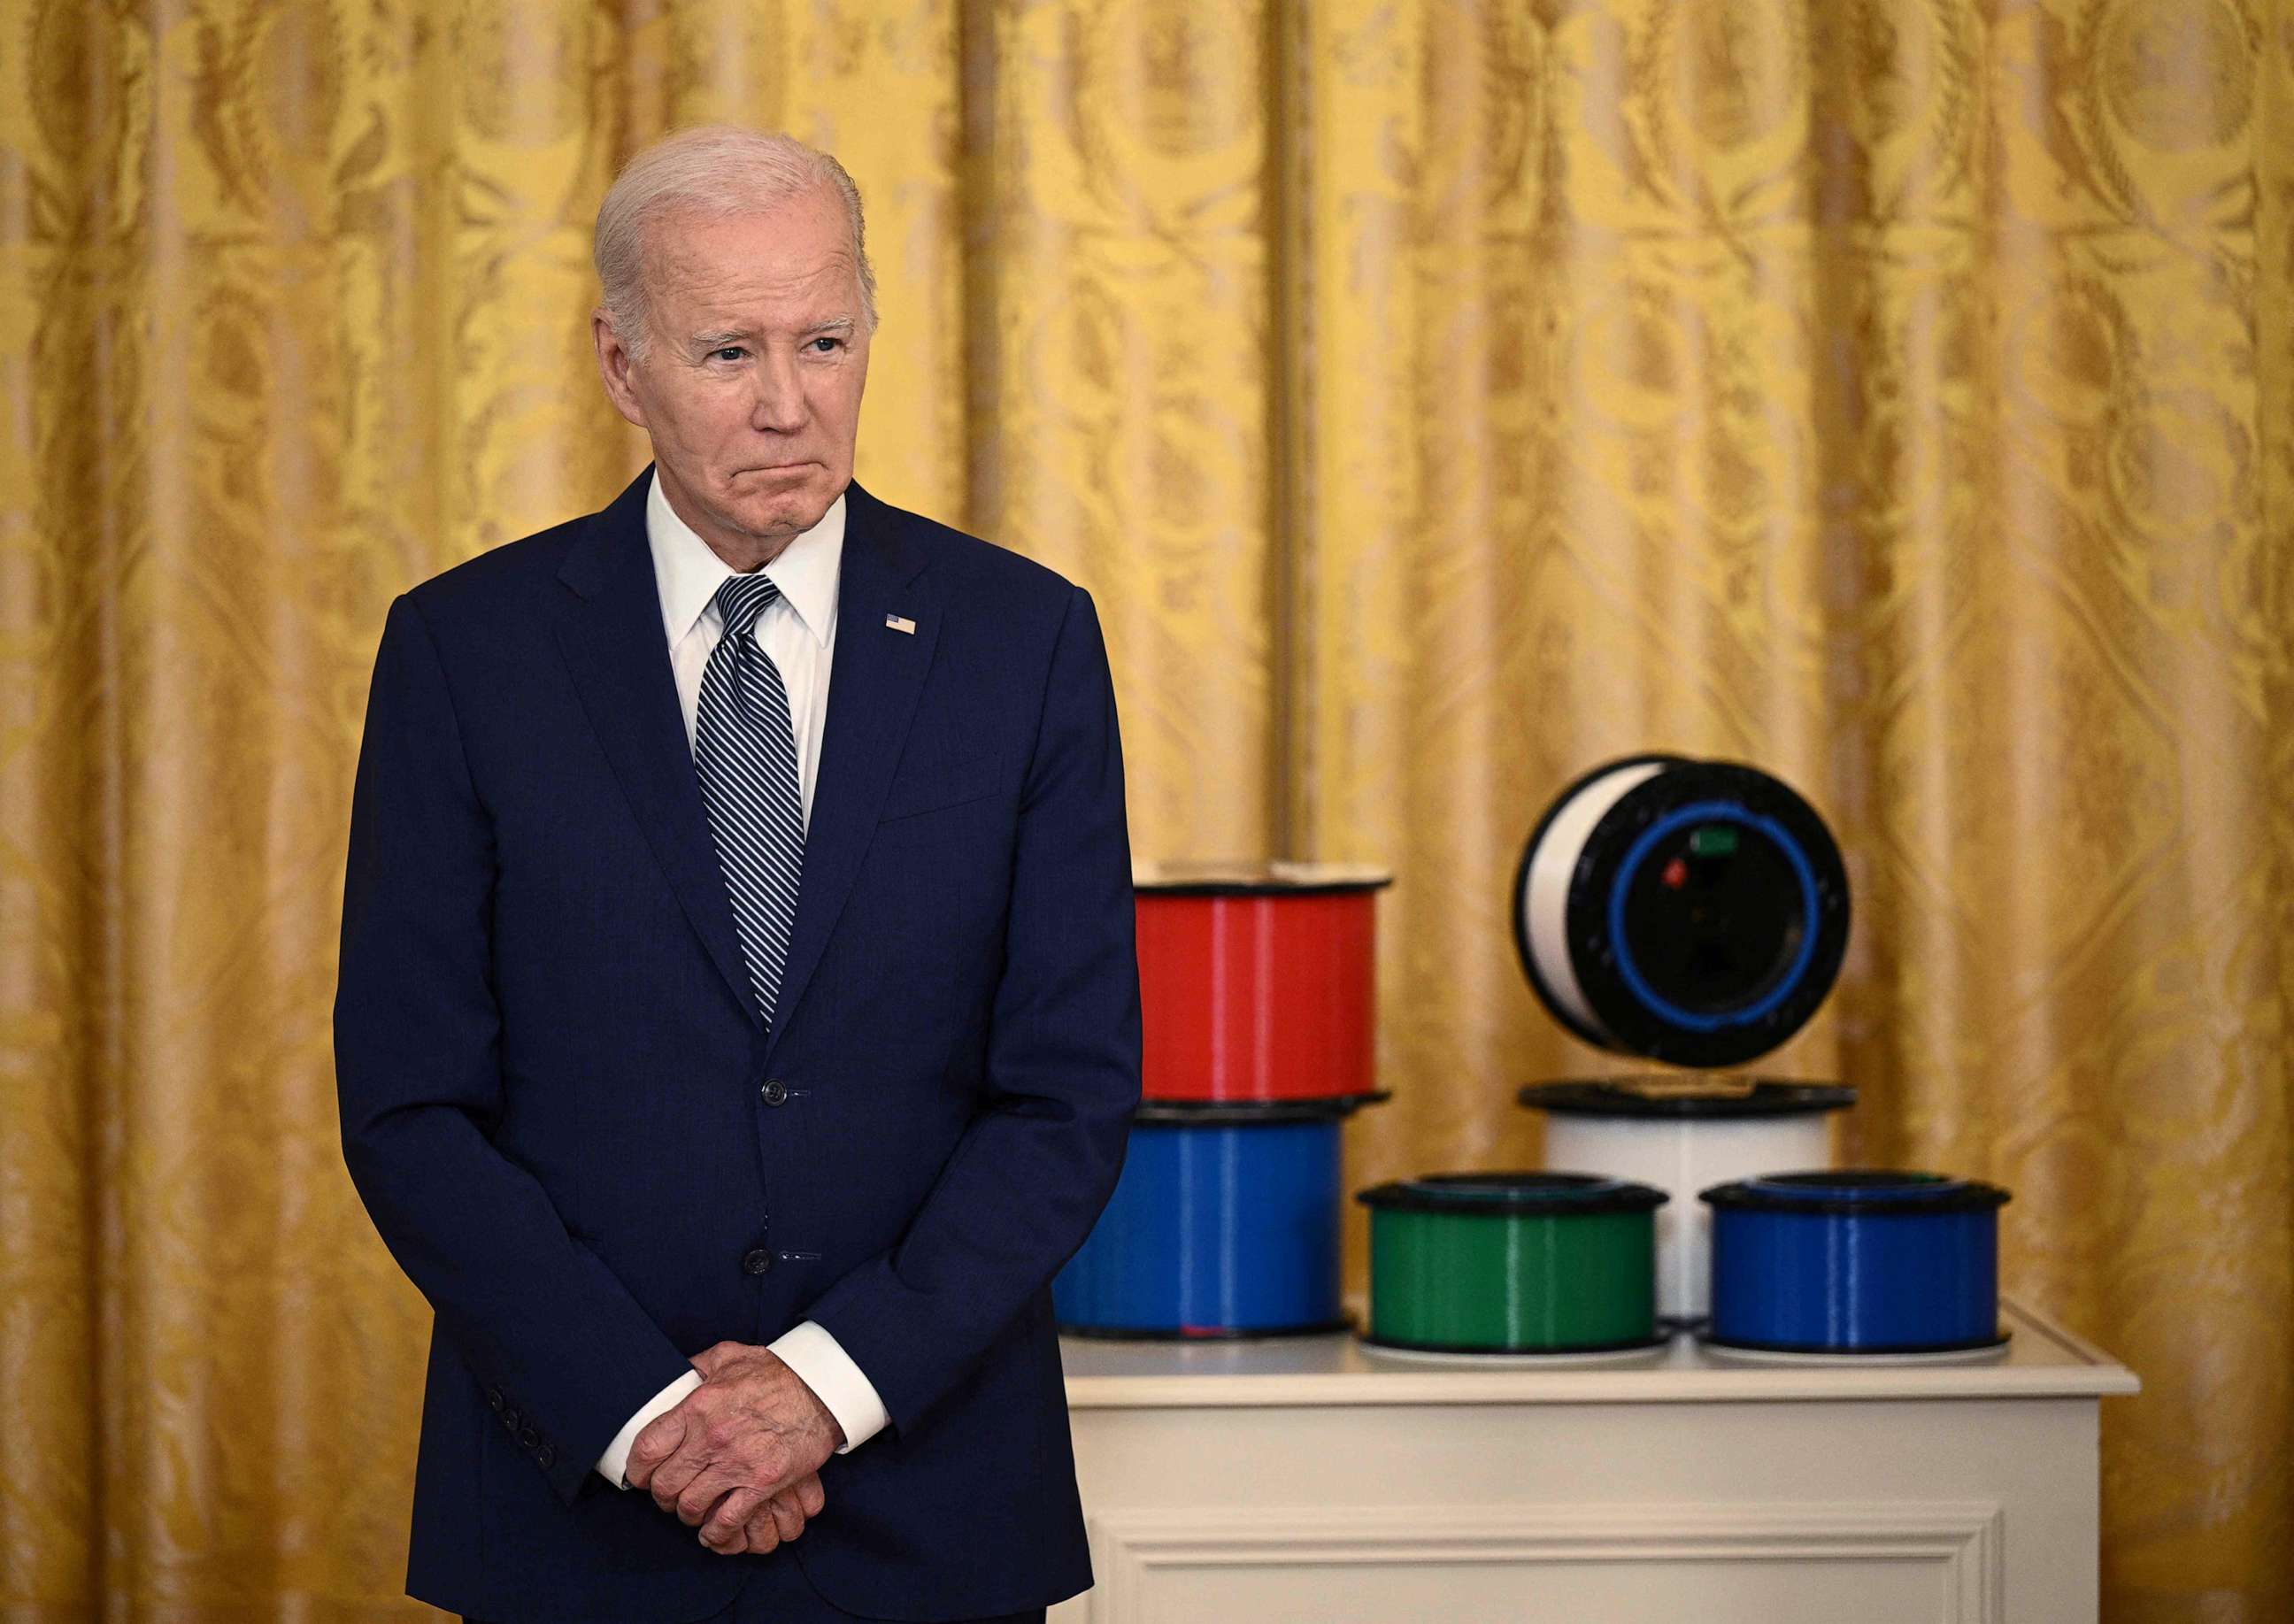 PHOTO: President Joe Biden looks on during a high-speed internet infrastructure announcement in the East Room of the White House, June 26, 2023.